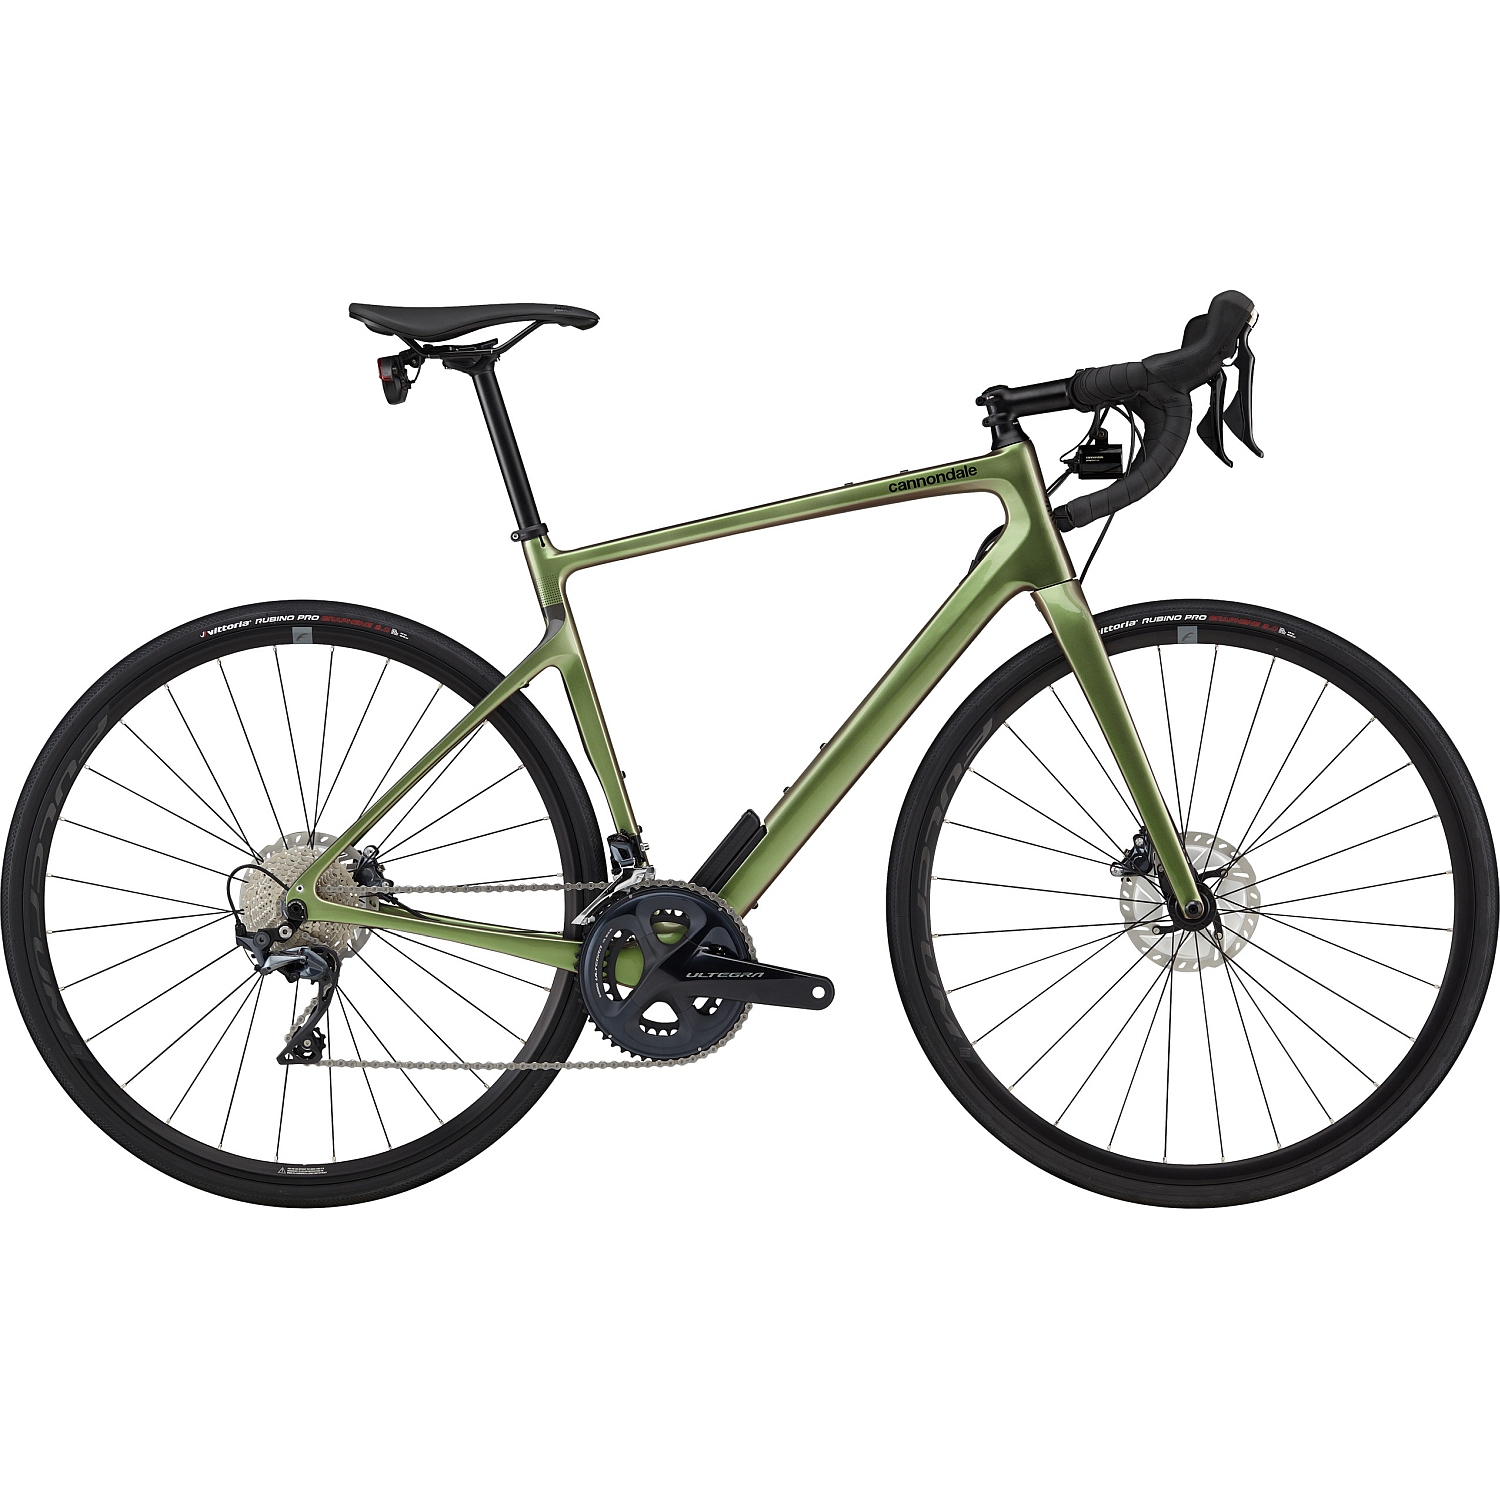 Productfoto van Cannondale SYNAPSE CARBON 2 RL - Shimano Ultegra Racefiets - 2023 - beetle green